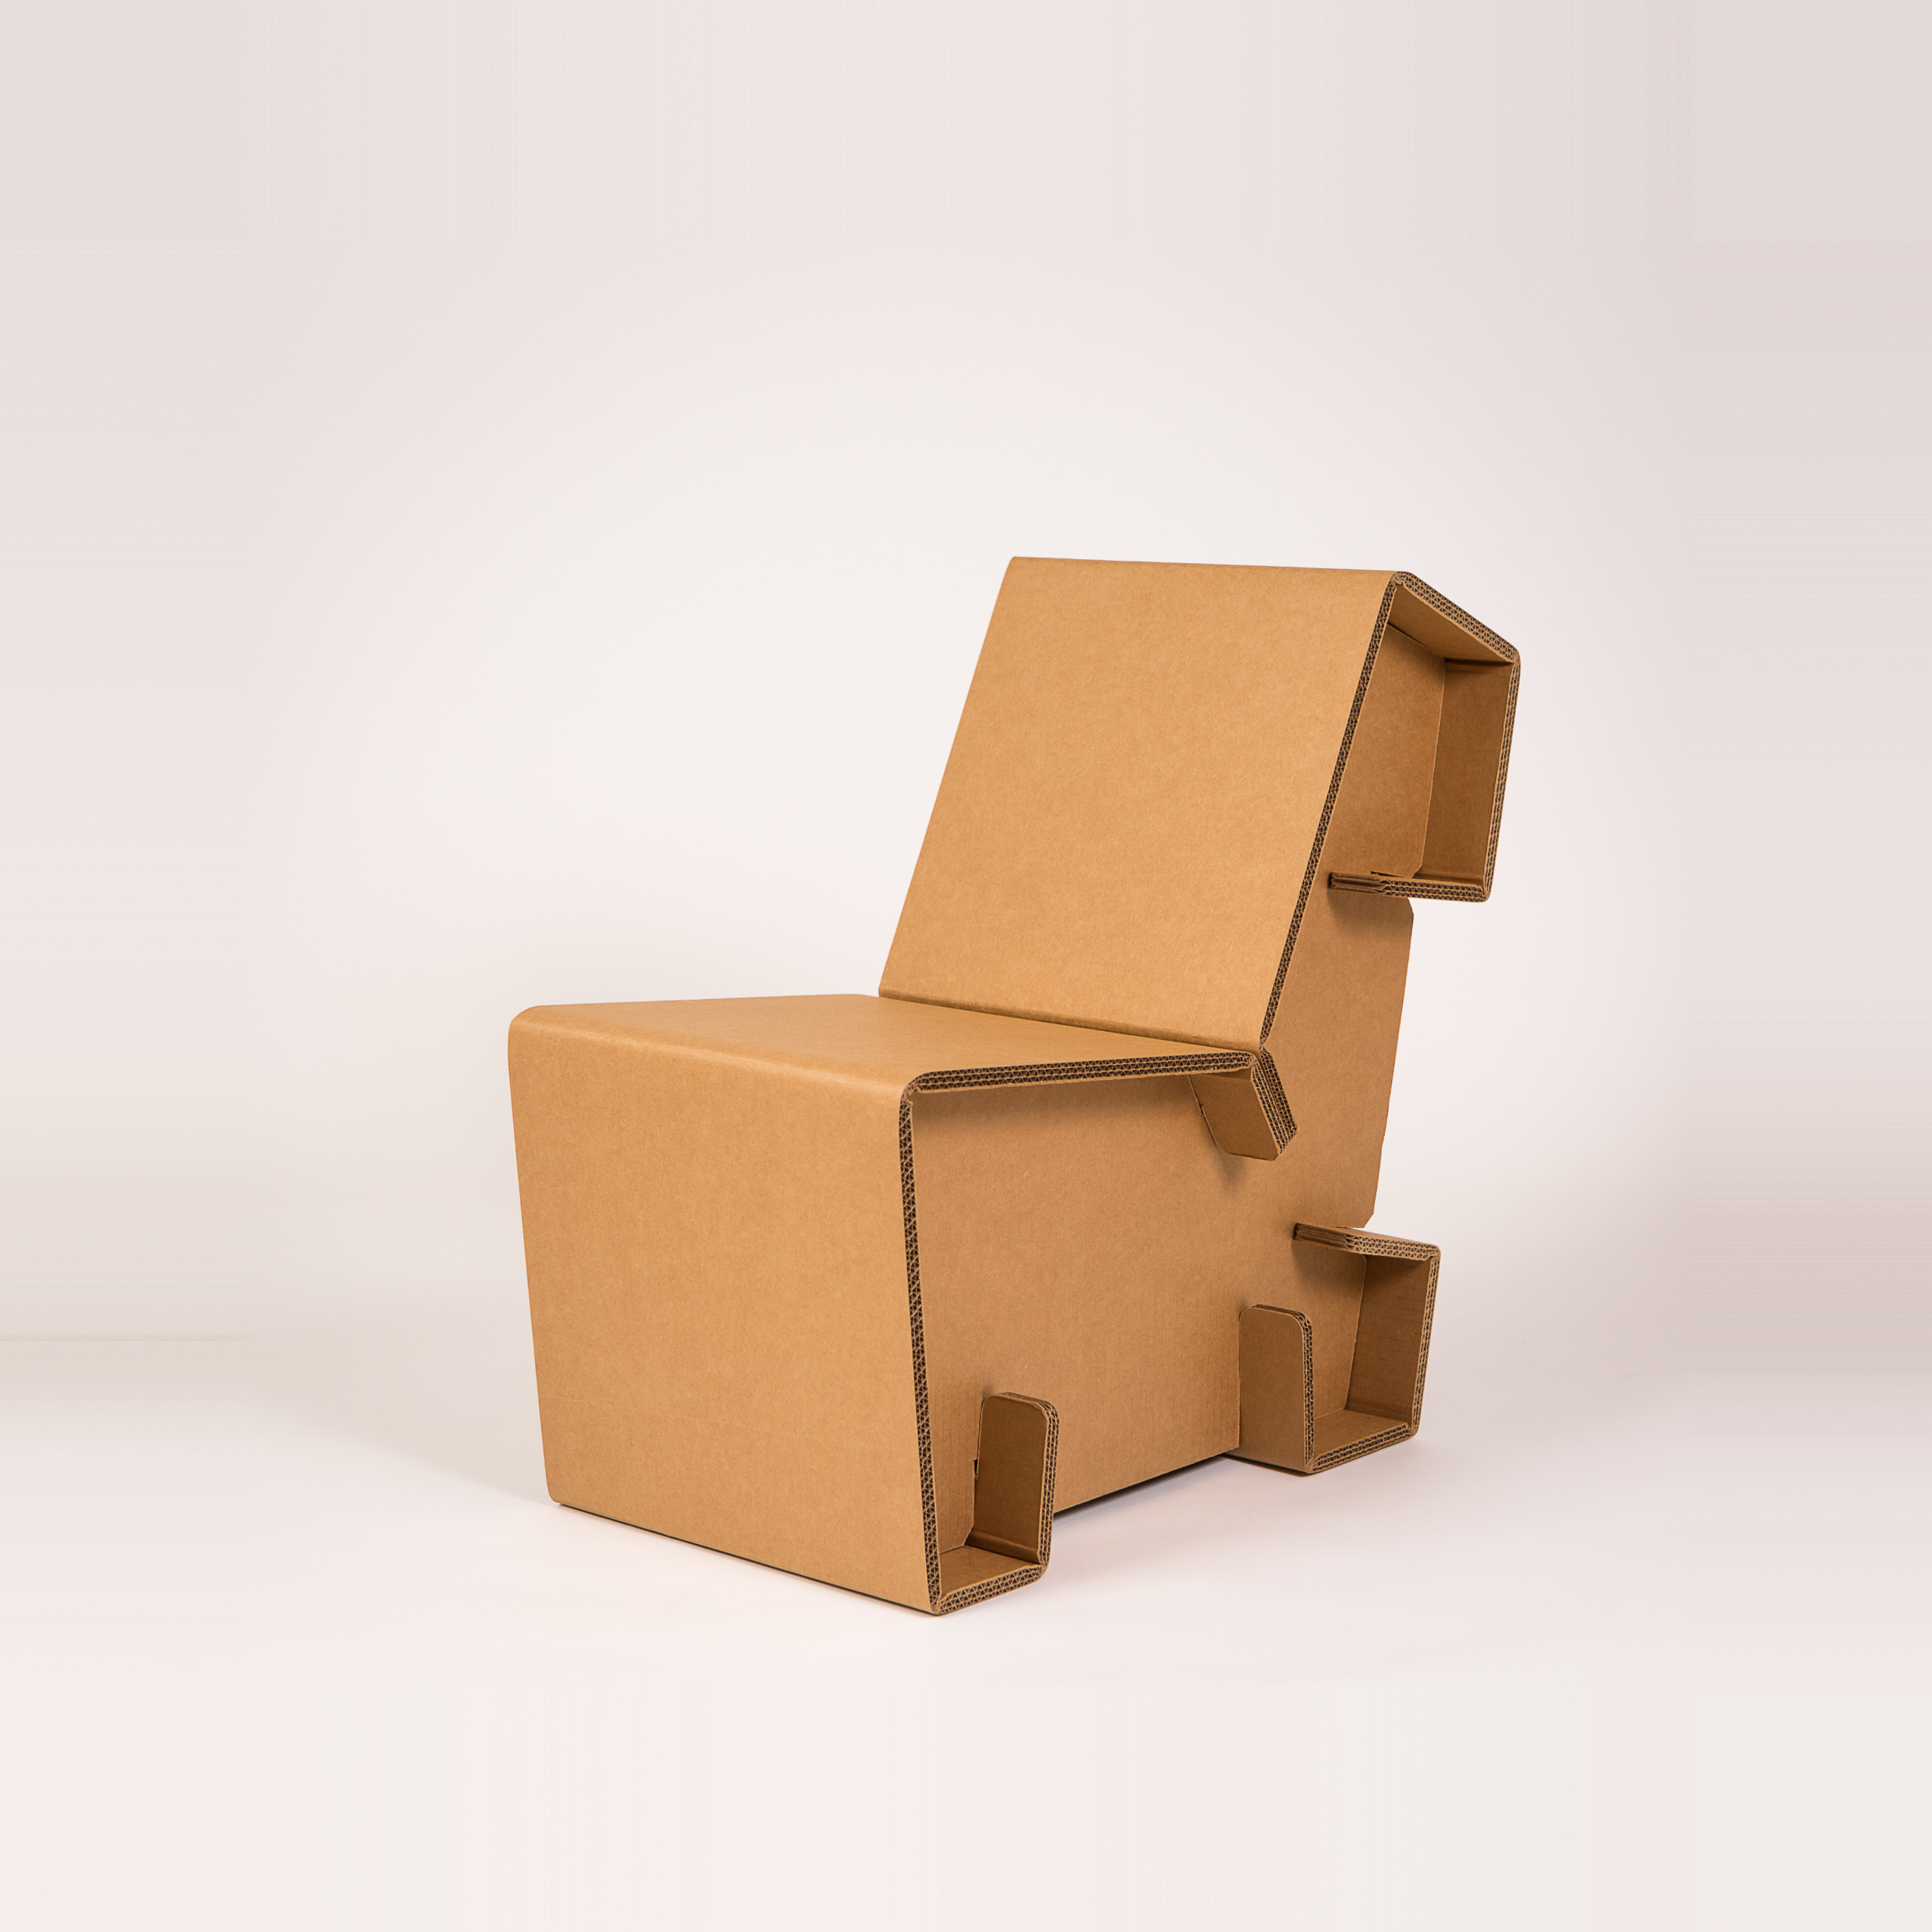 Cardboard Lounge Chairs - Free Shipping | Chairigami